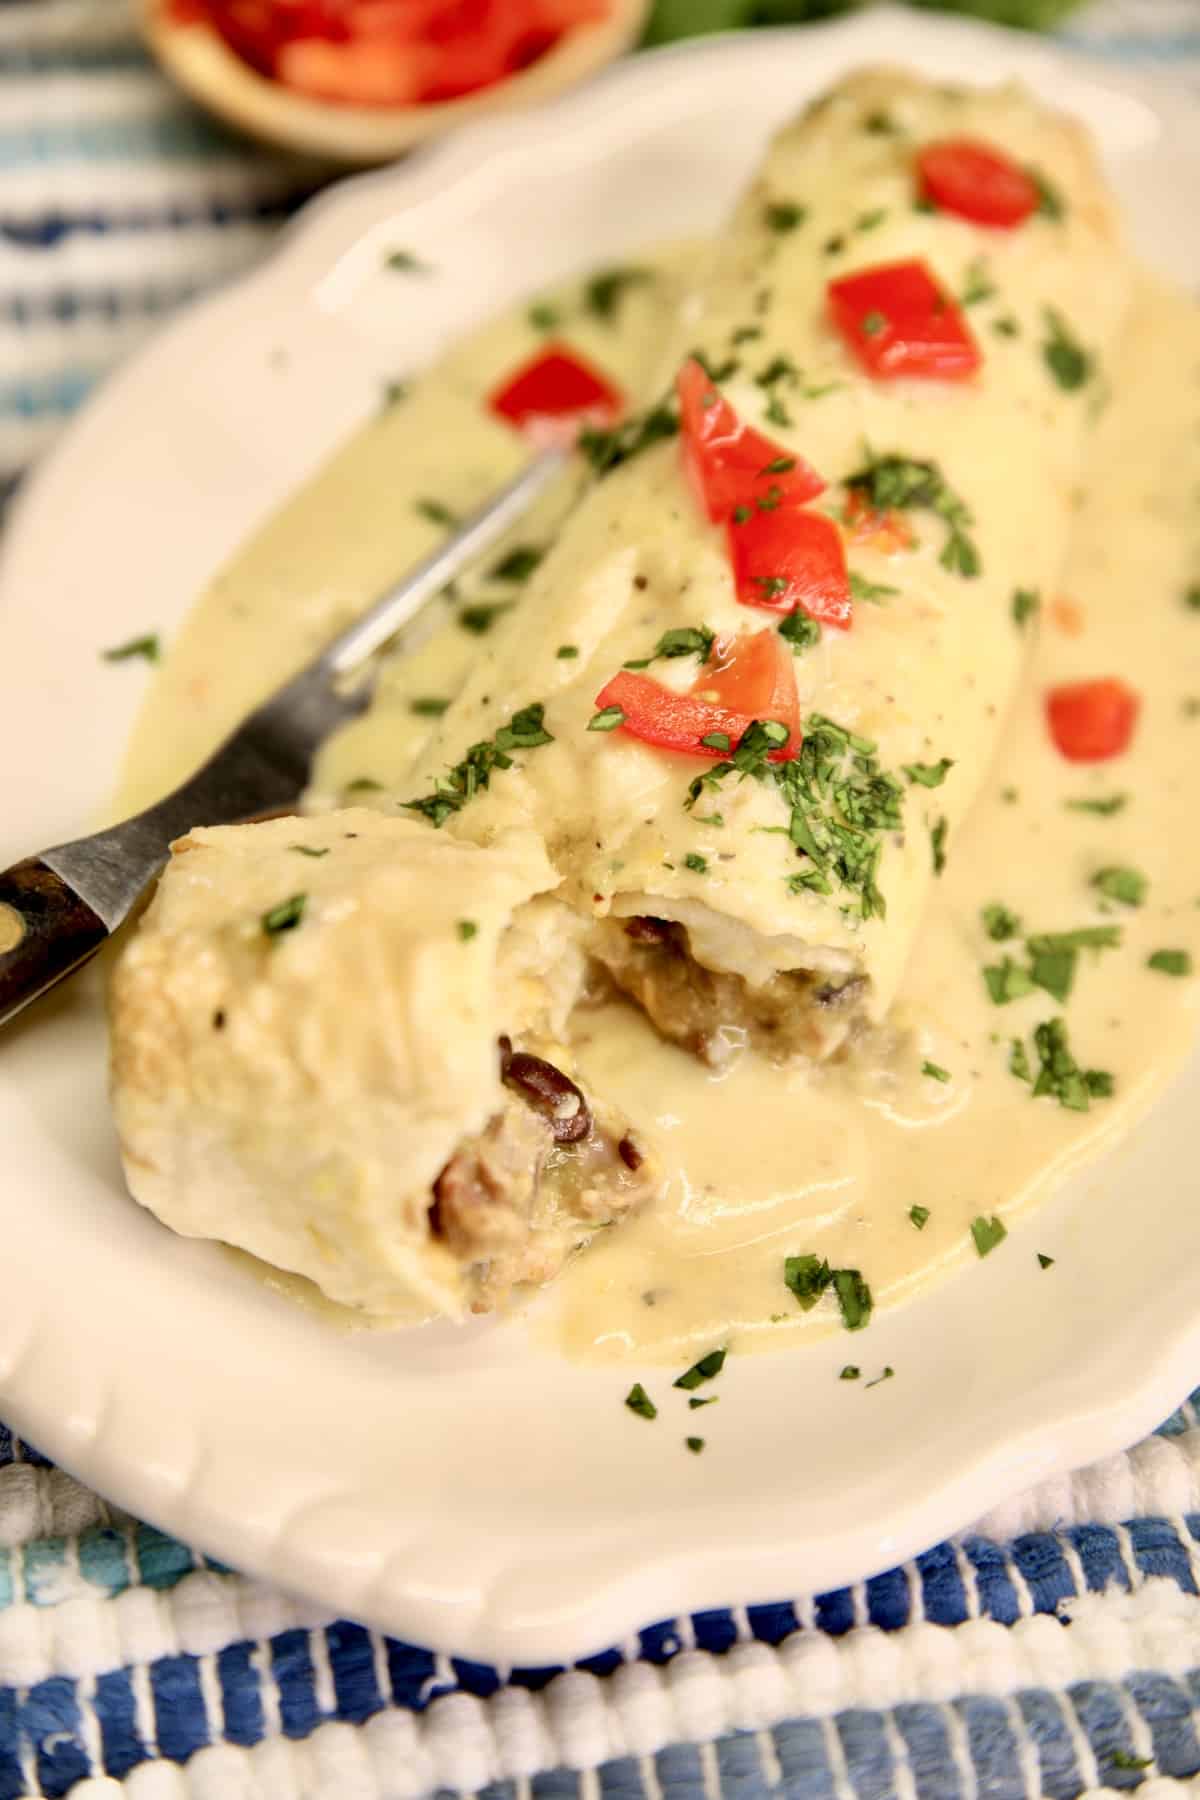 Chicken burrito with green chile sauce, cut to show filling.